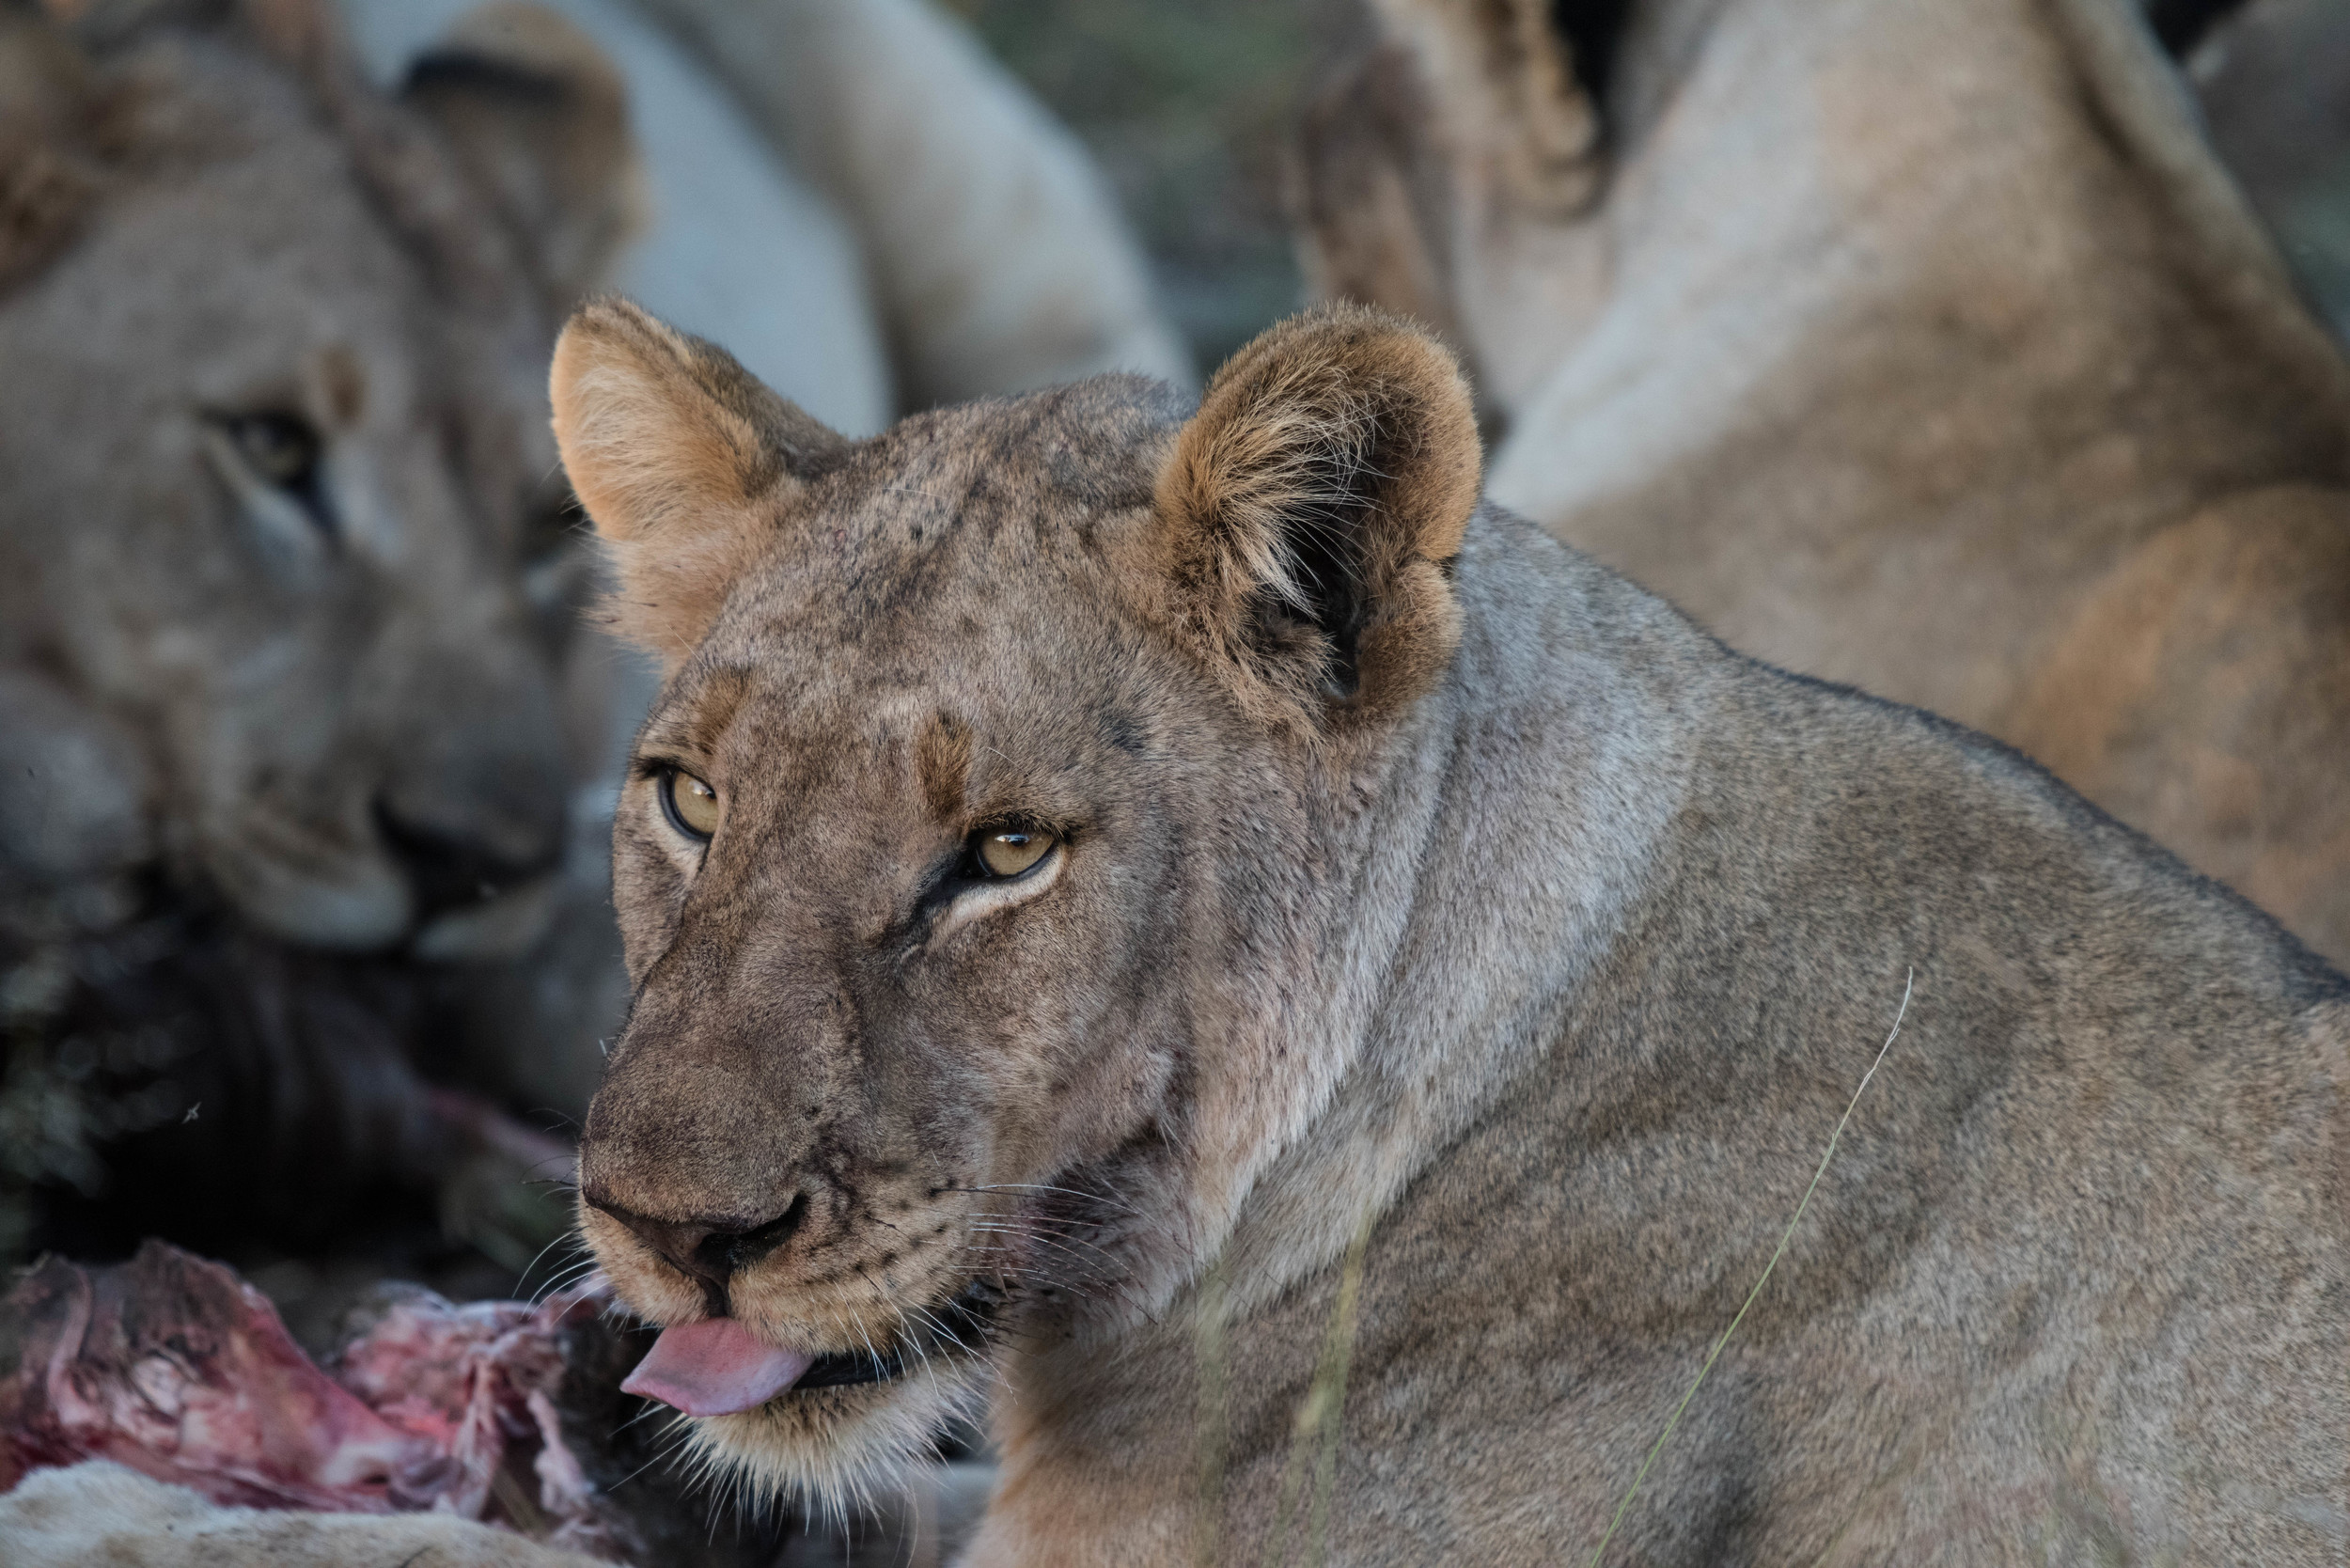 Lions feeding, Madikwe Game Reserve, South Africa